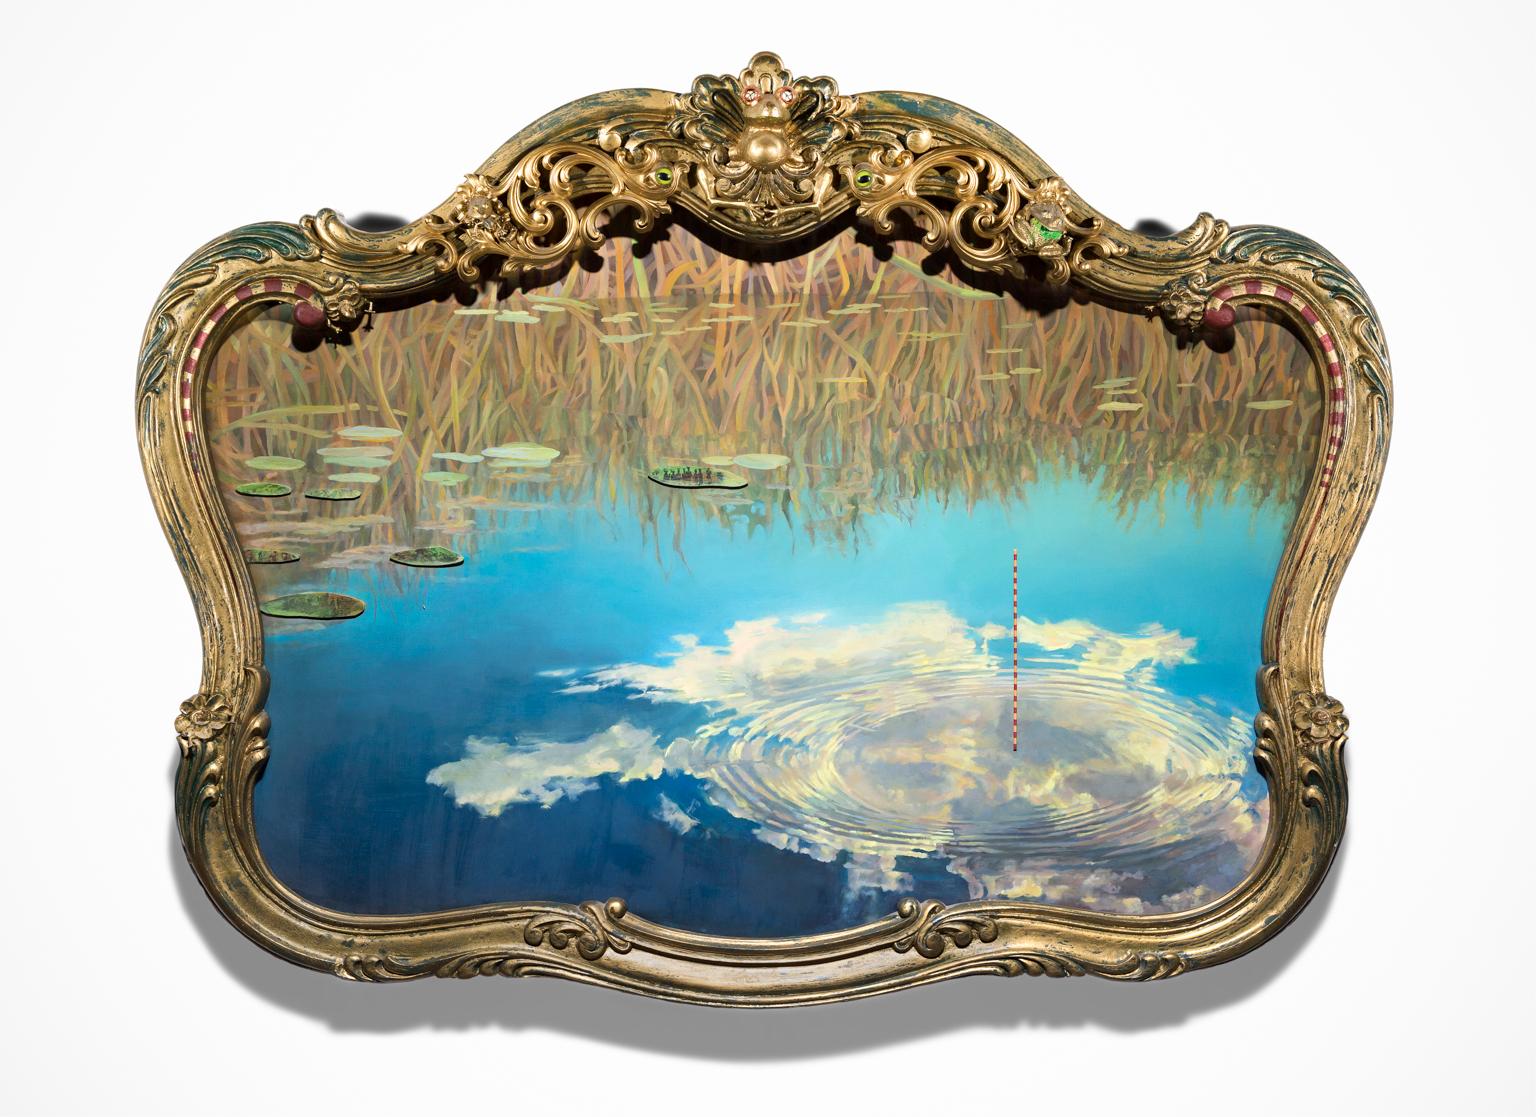 Catherine Peet Landscape Painting - "Ripple Effect", Oil on Wood, Gilt Mirror Framed Pond Reflection of Clouds & Sky